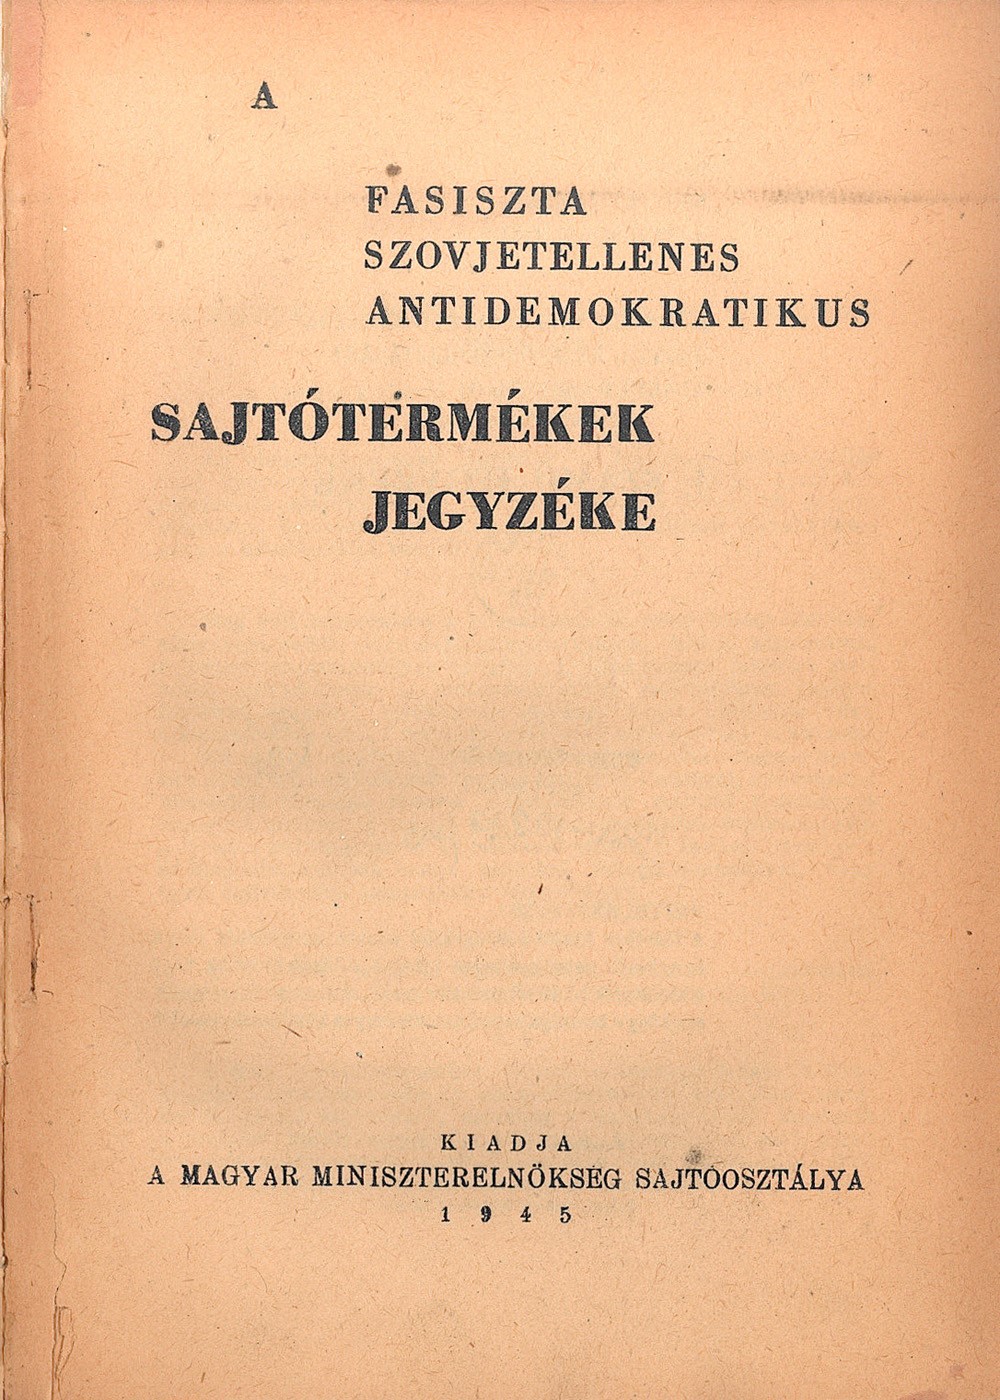 The published list of the banned Fascist and Anti-Soviet books in 1945.